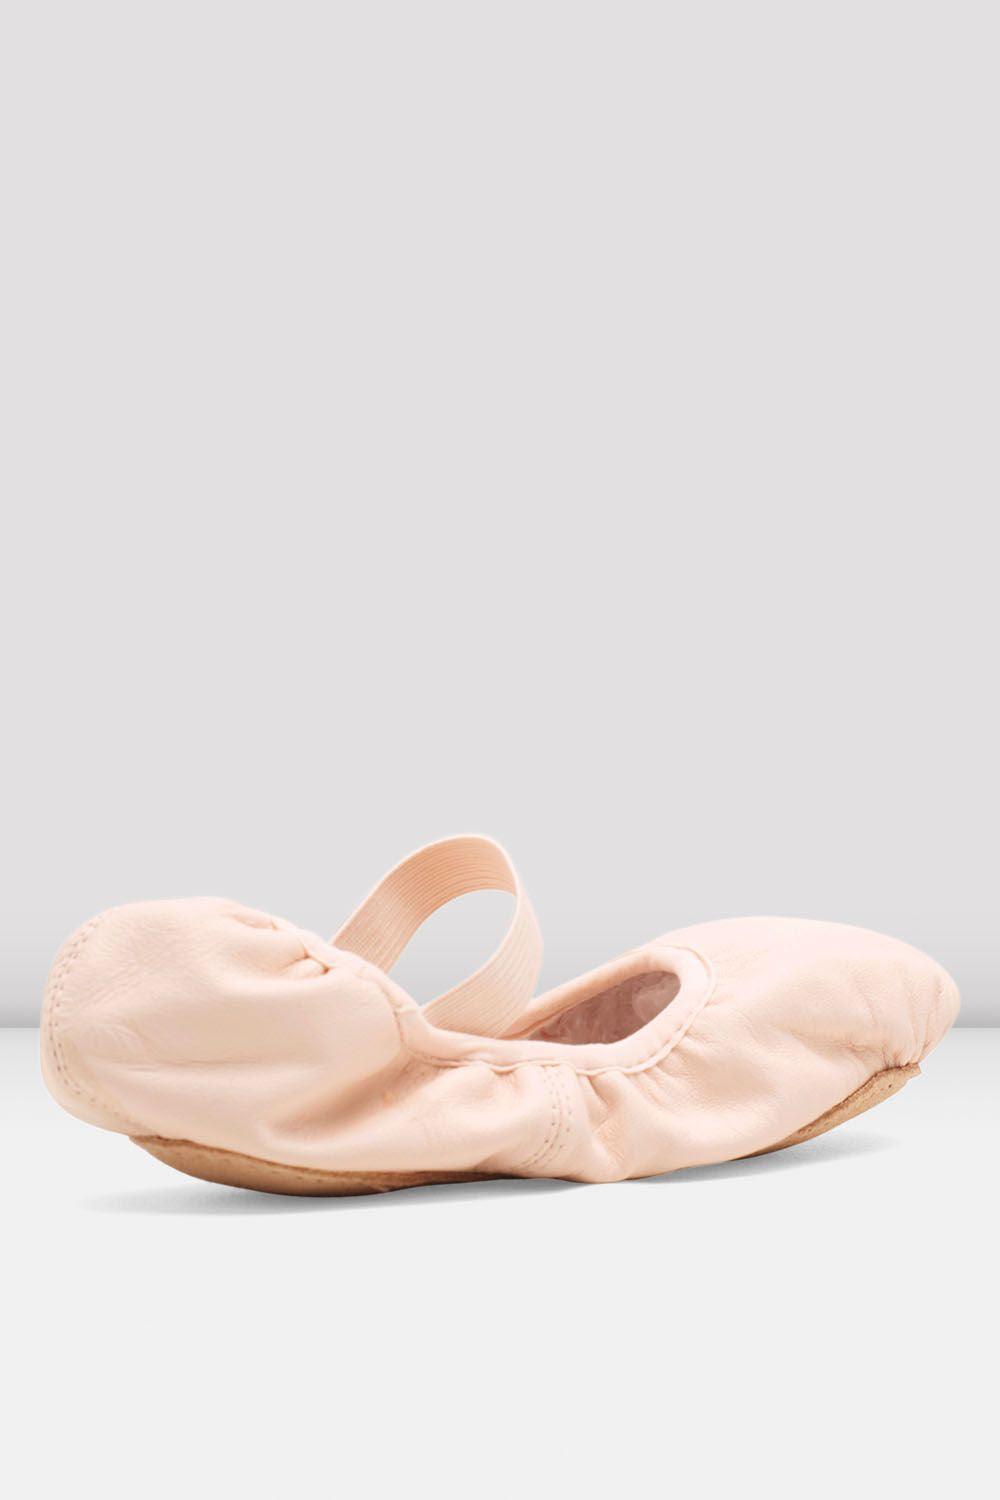 Bloch Girls Cassiopeia Ballerina Shoes Pink Black Leather